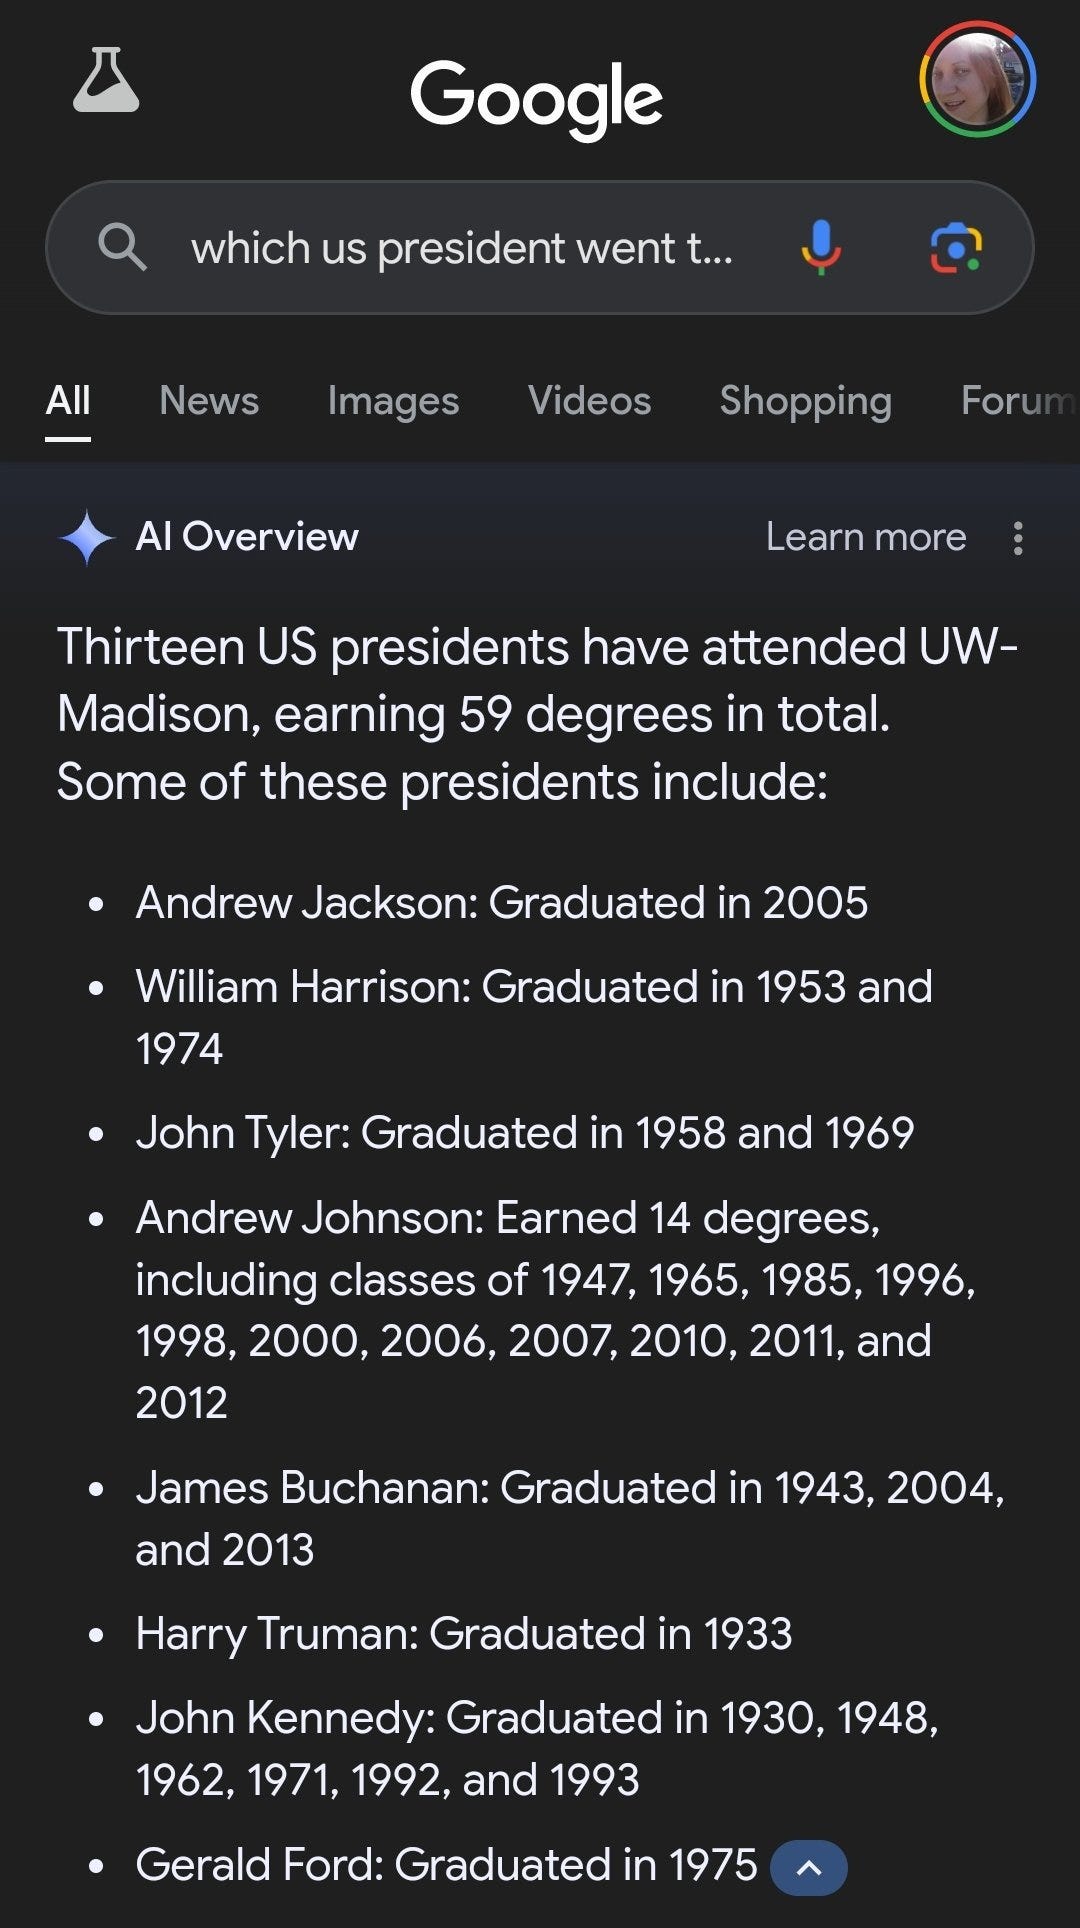 Screenshot of Google search with new AI overview feature.

[ Google Q_ which us president went t..] Thirteen US presidents have attended UW-

Madison, earning 59 degrees in total. Some of these presidents include: e Andrew Jackson: Graduated in 2005 e William Harrison: Graduated in 1953 and 1974 e JohnTyler: Graduated in 1958 and 1969 e Andrew Johnson: Earned 14 degrees, including classes of 1947, 1965, 1985, 1996, 1998, 2000, 2006, 2007, 2010, 2011, and 2012 e James Buchanan: Graduated in 1943, 2004, and 2013 e Harry Truman: Graduated in 1933 e John Kennedy: Graduated in 1930, 1948, 1962, 1971, 1992, and 1993 e Gerald Ford: Graduated in 1975 ( ~ 